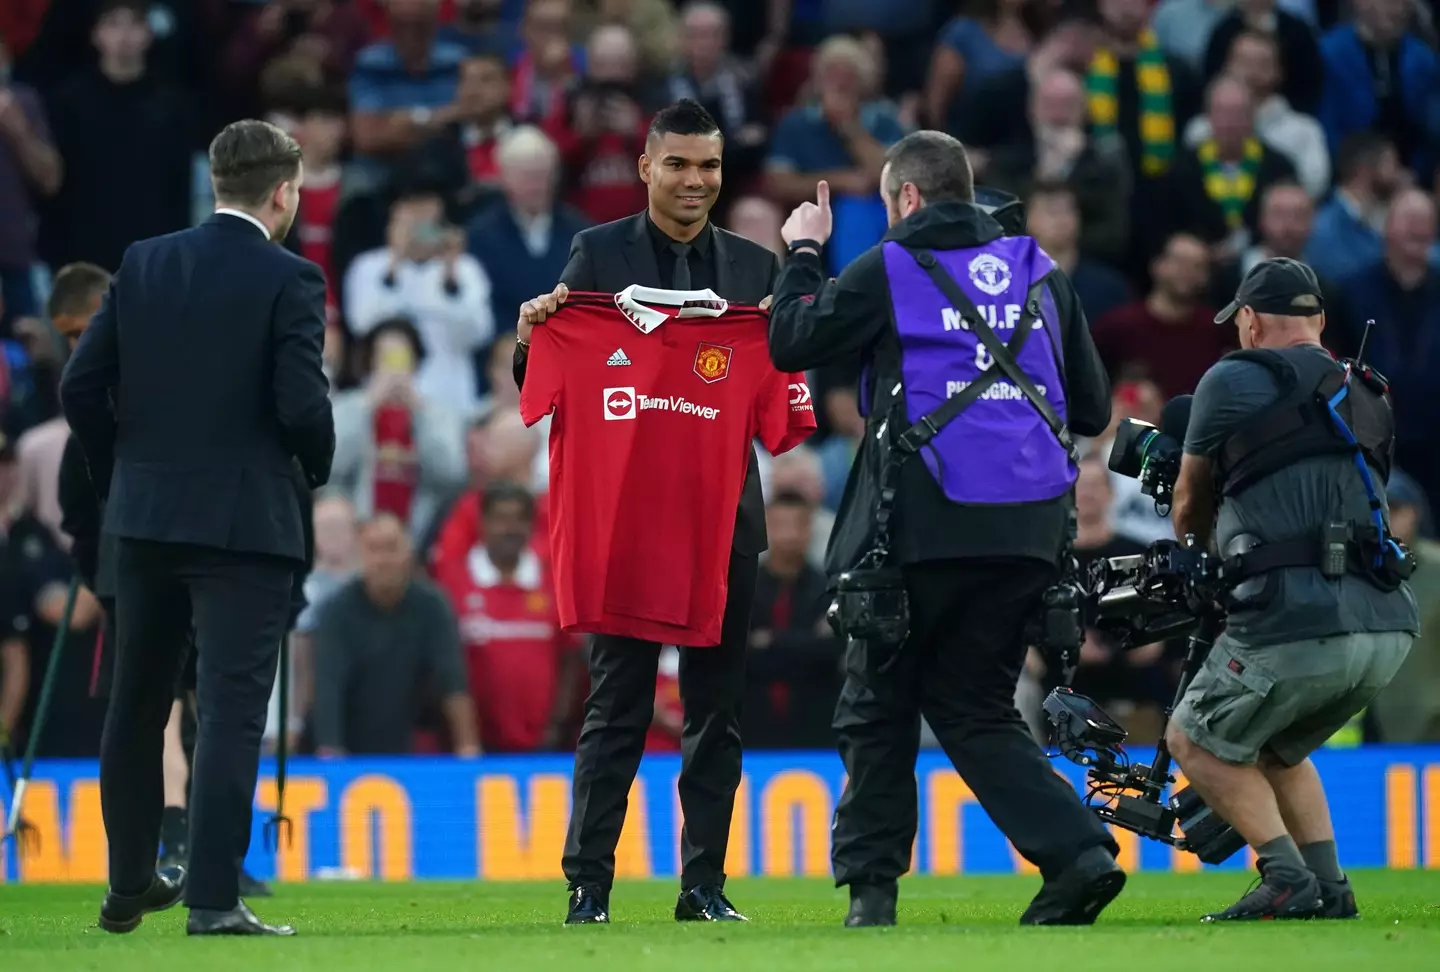 Casemiro arrived at United ahead of the win over Liverpool. Image: Alamy